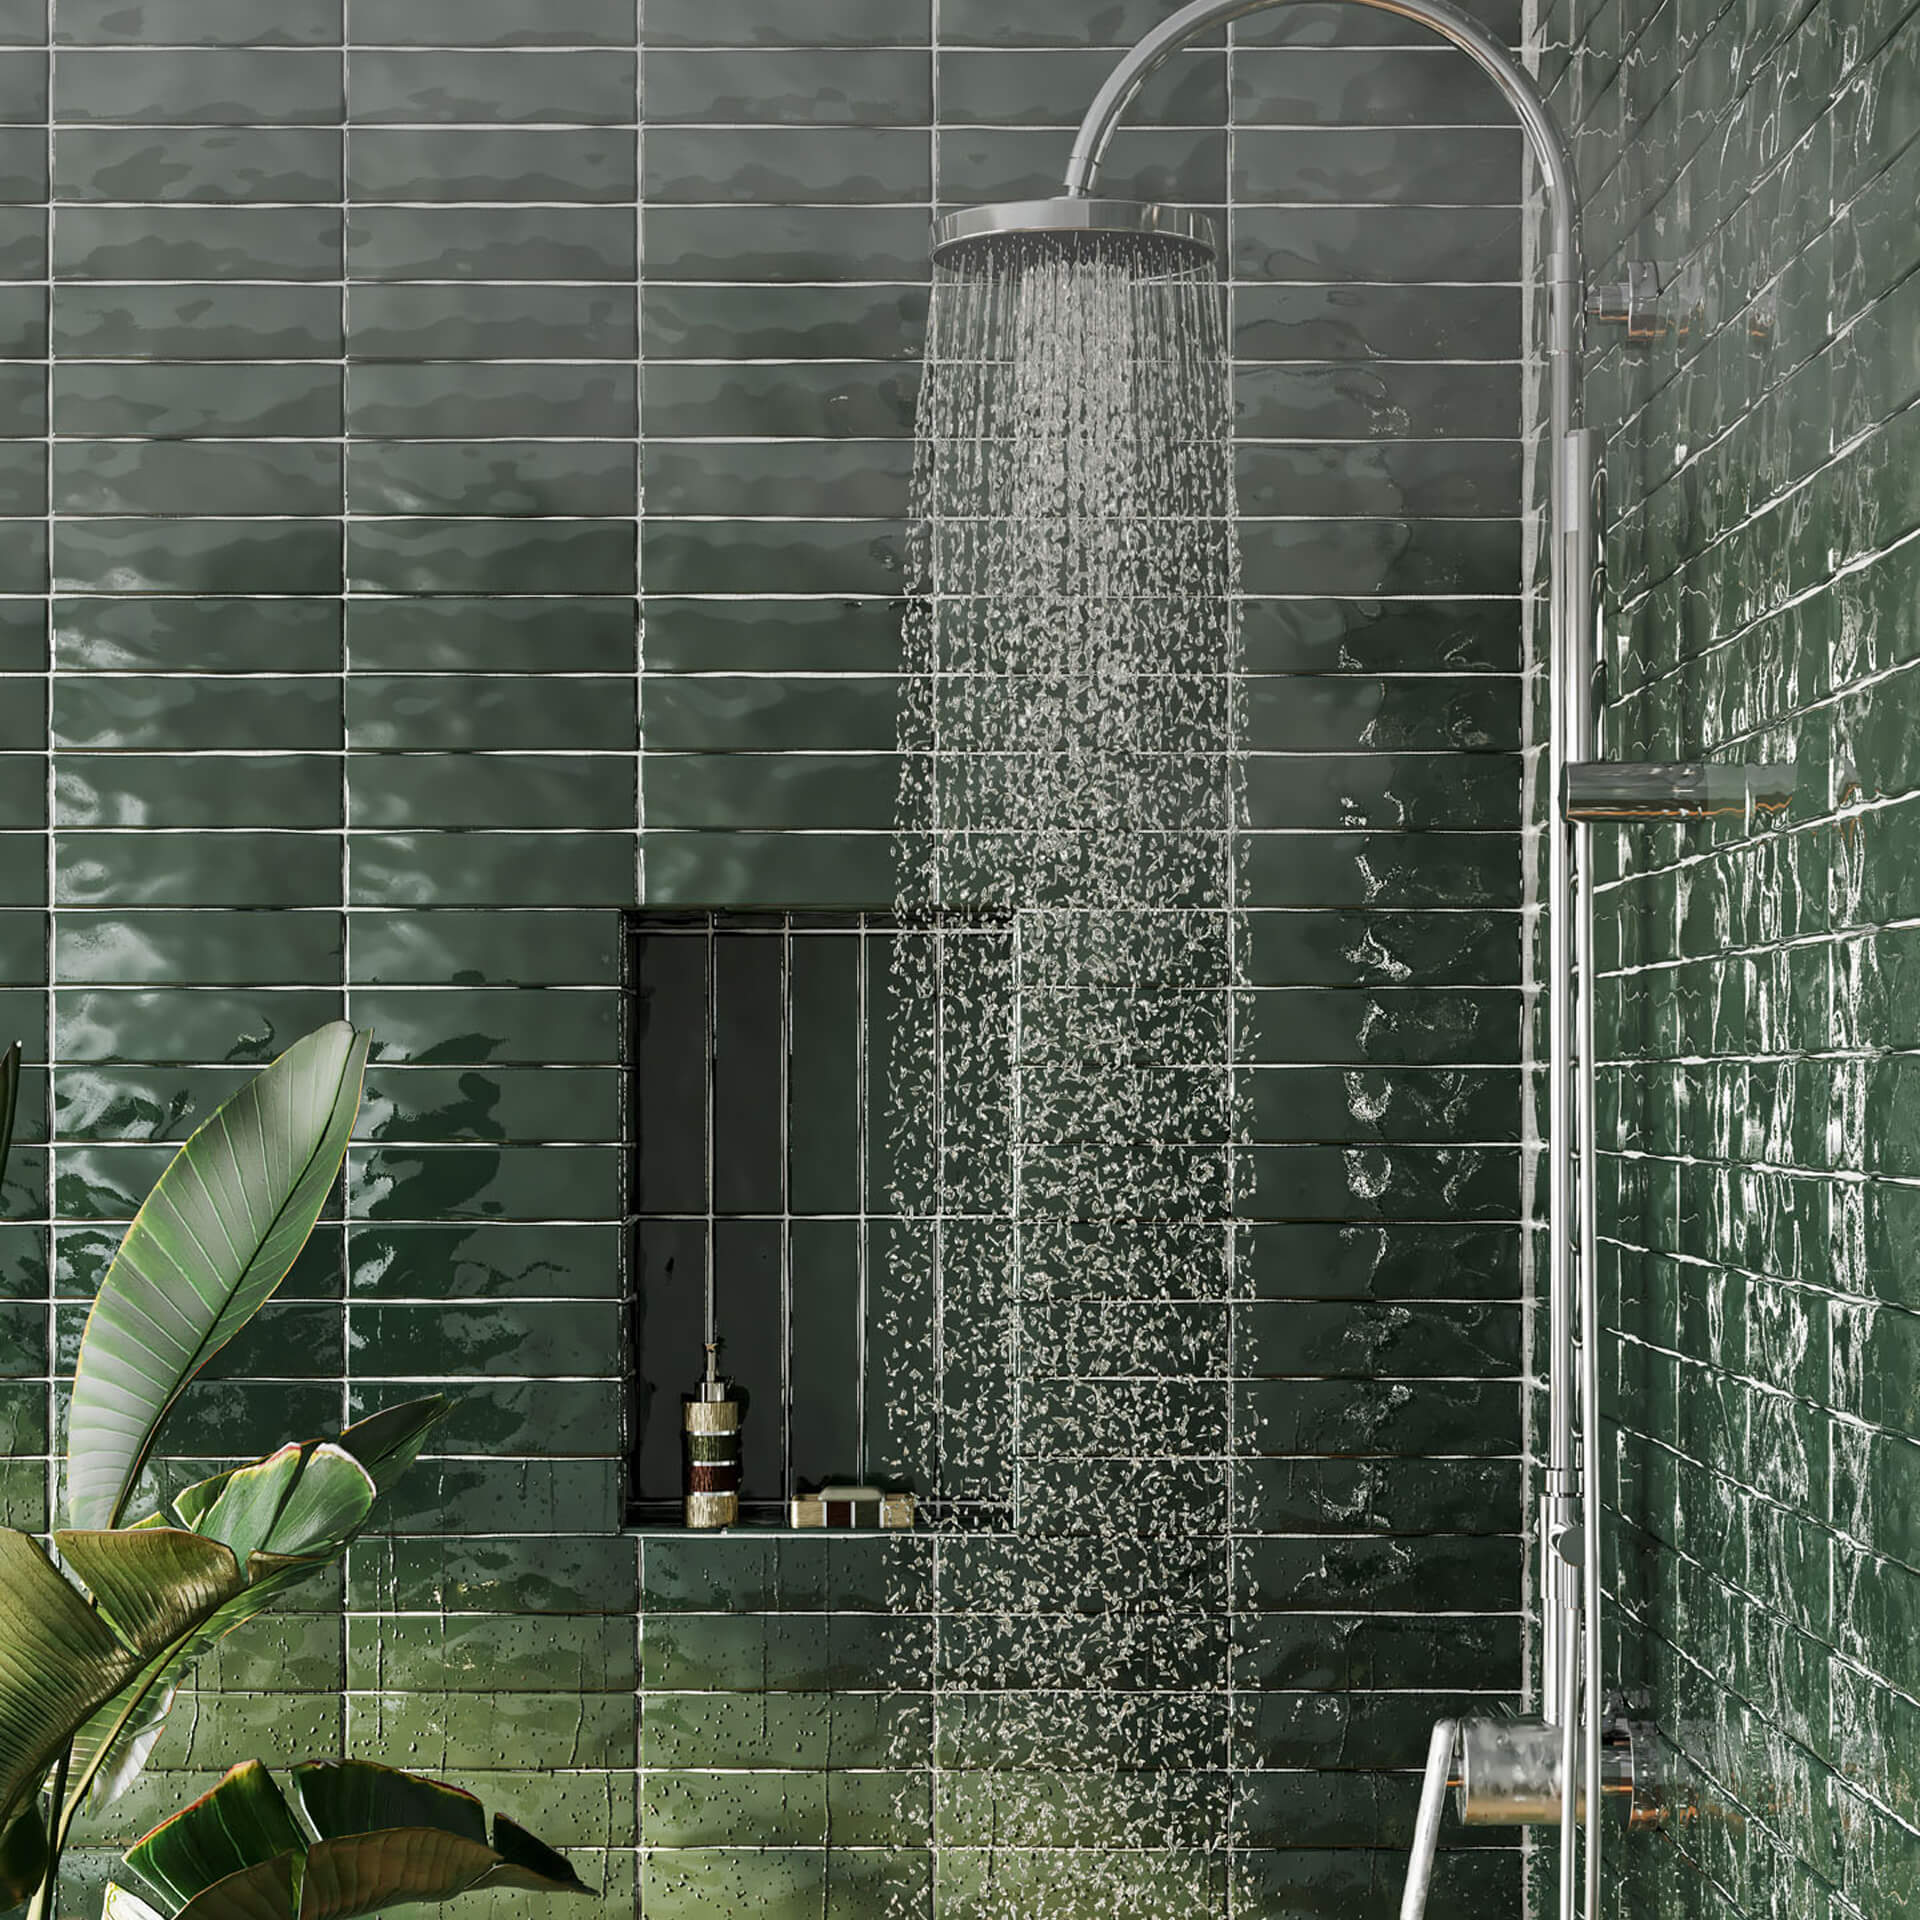 High-Quality 3D Rendering of Bathroom Wall Tiles